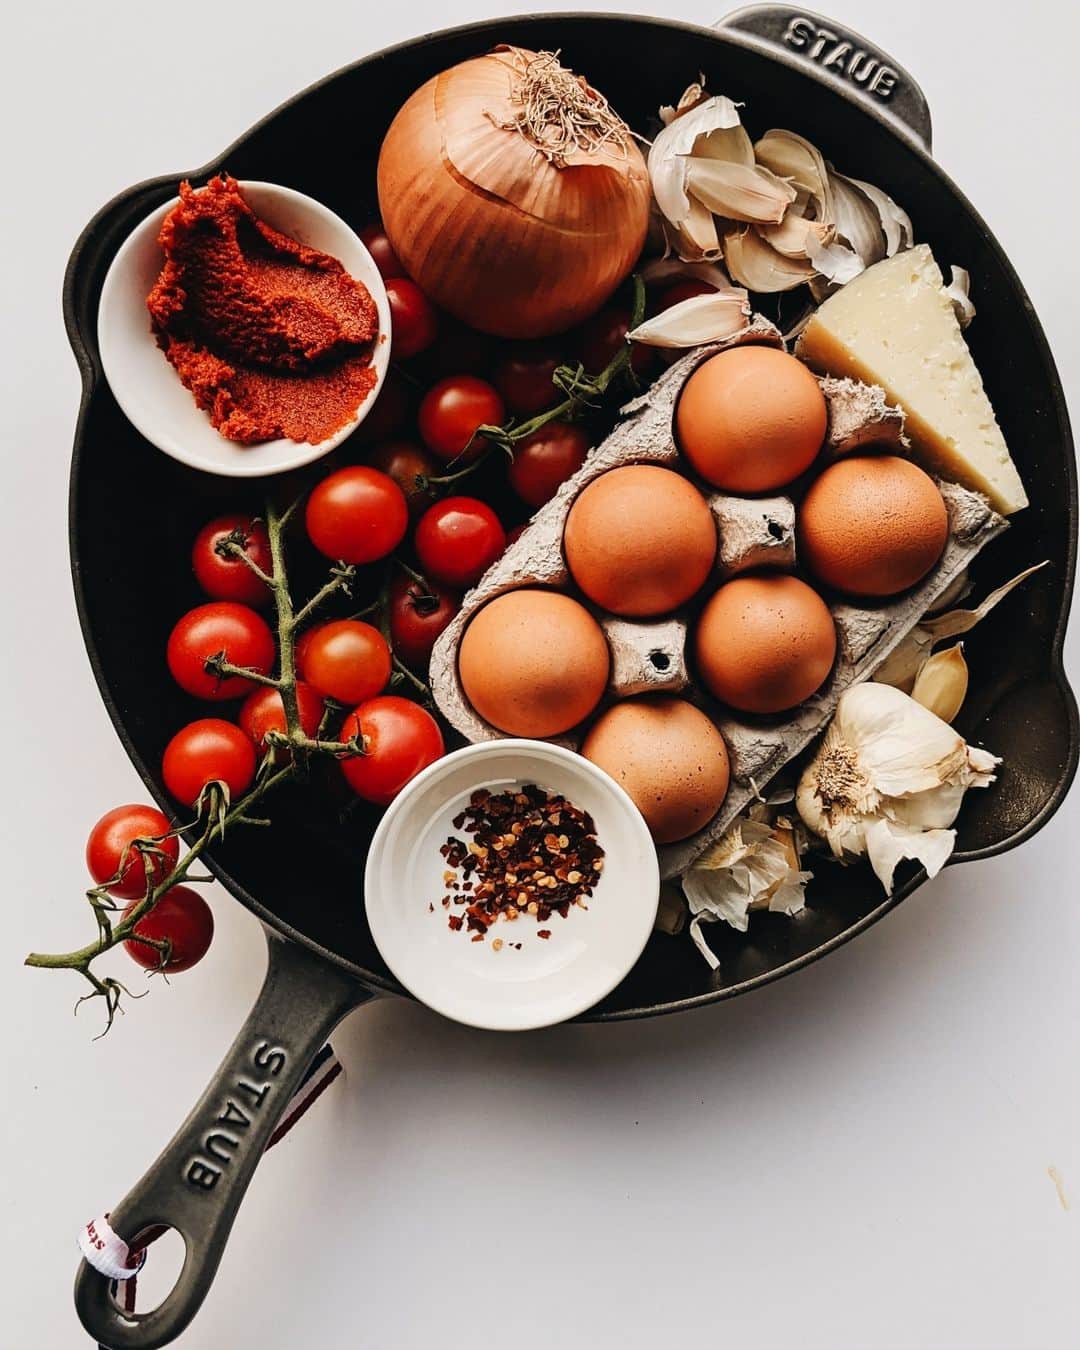 Staub USA（ストウブ）のインスタグラム：「@karimichelleyoung is planning something delicious. What would you make with these outstanding ingredients? #madeinStaub」